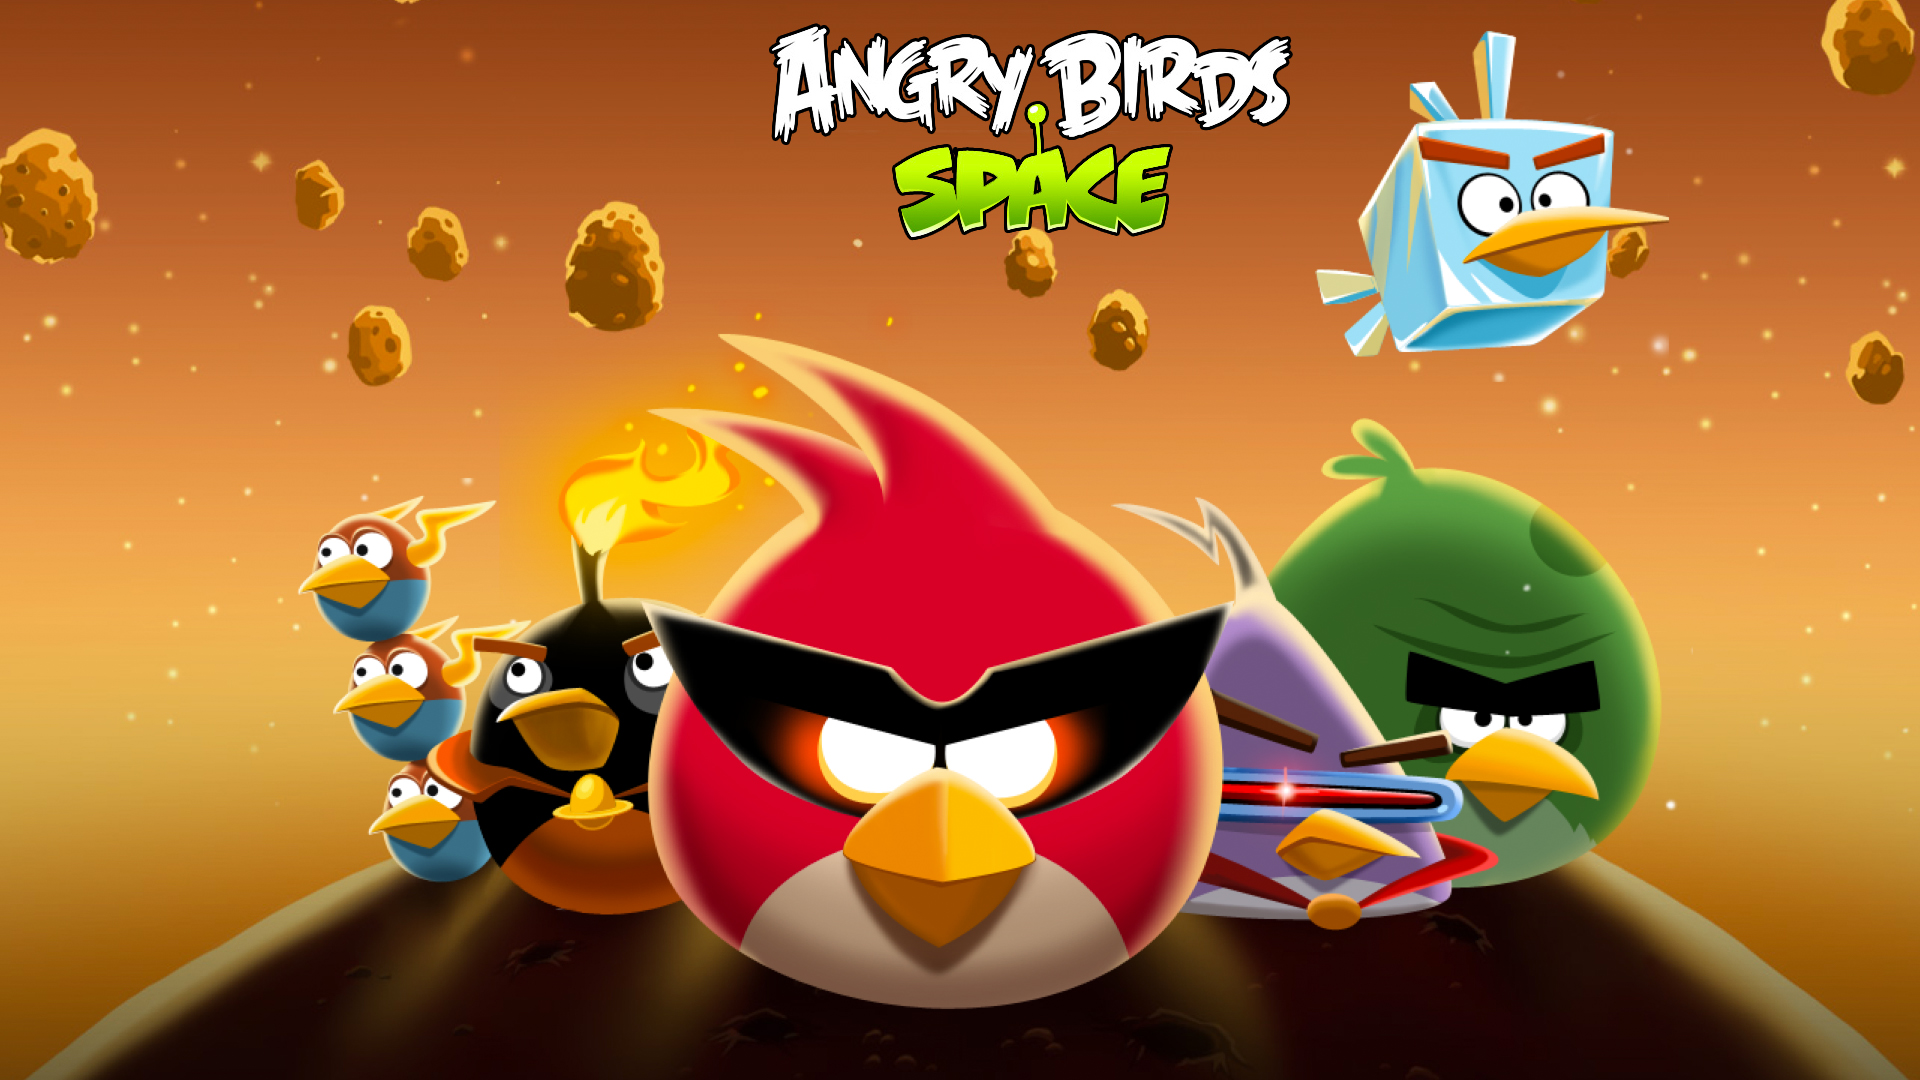 Free download angry birds space wallpaper collection for desktops ipad angry birds [1920x1080] for your Desktop, Mobile & Tablet. Explore Angry Bird Wallpaper for Desktop. Birds Wallpaper Free Download